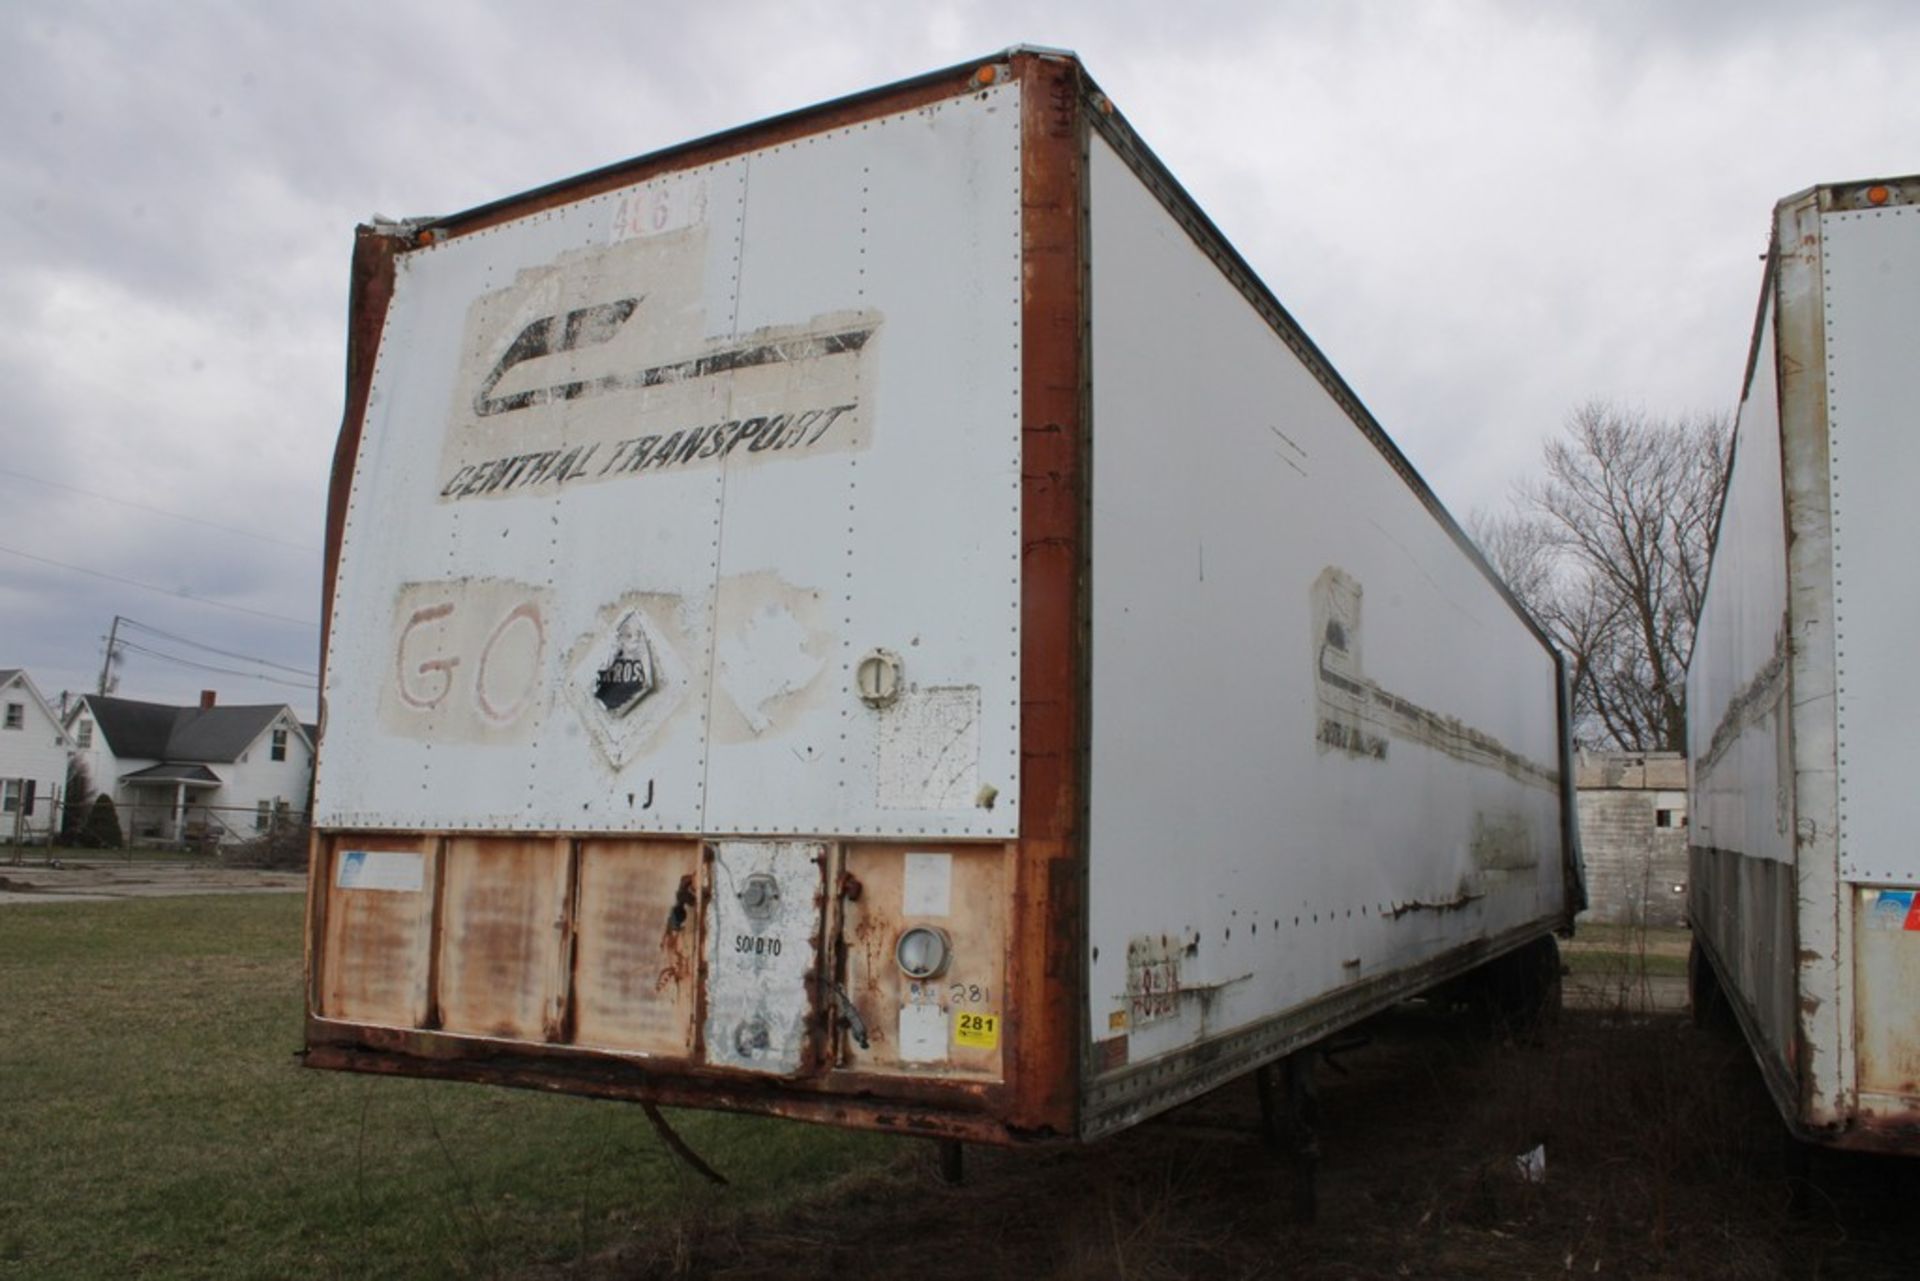 APPROX. 45’ UNIDENTIFIED ENCLOSED DRY VAN TRAILER